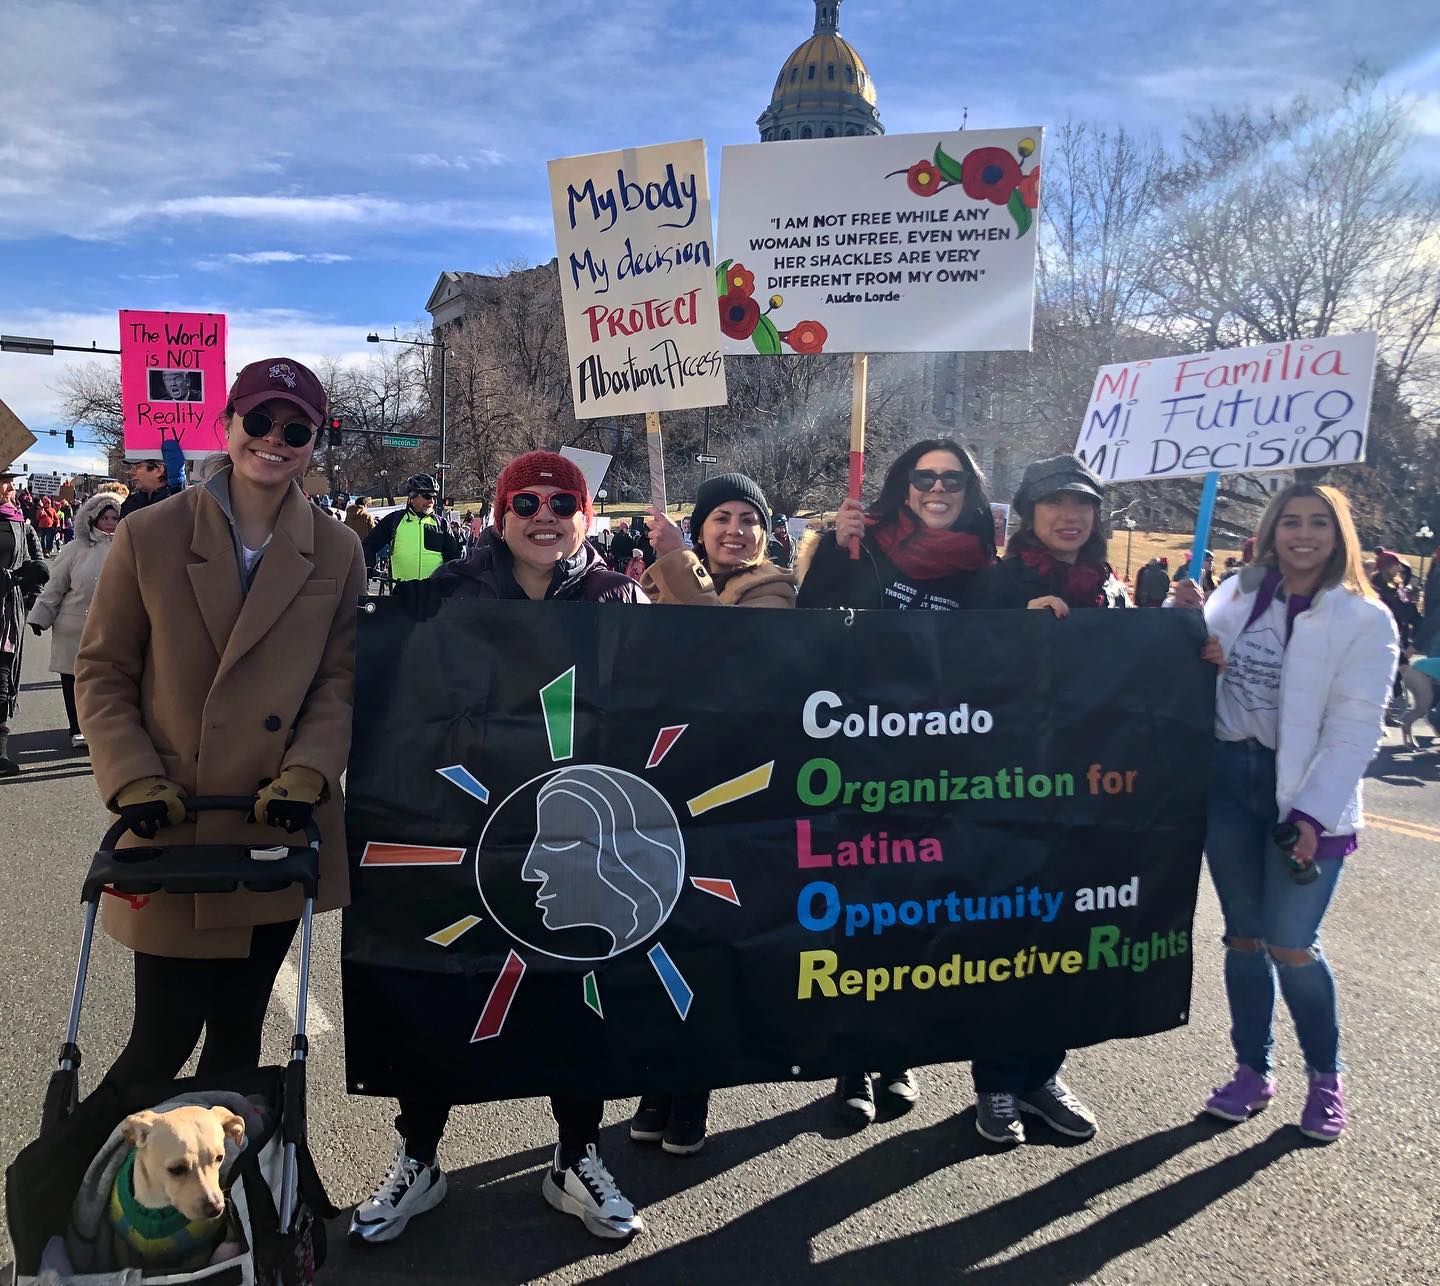 Colorado Organization for Latina Opportunity and Reproductive Rights